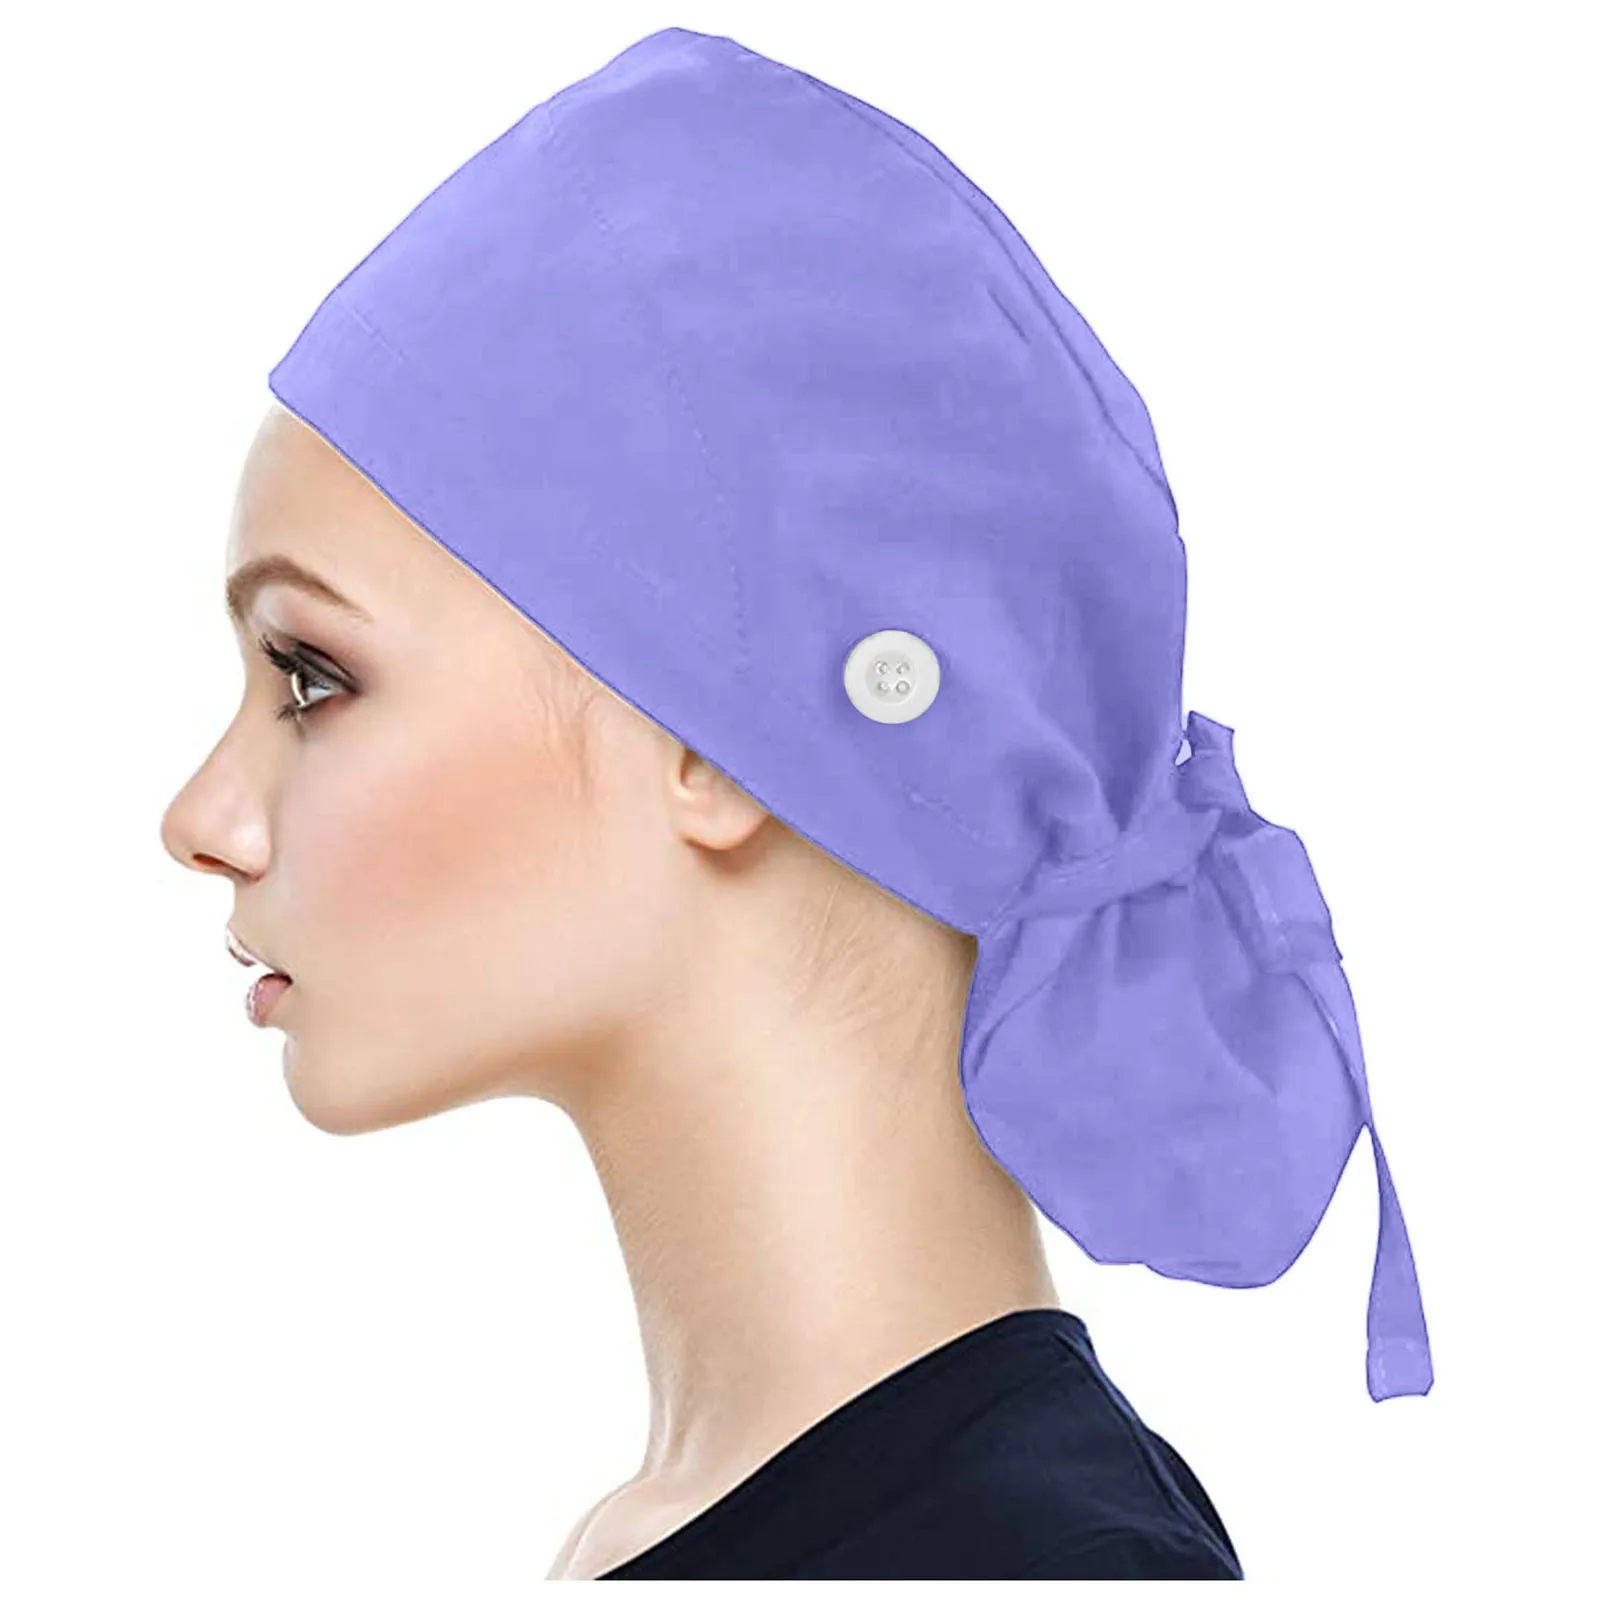 best beanie brands Working Scrub Cap with Button Sweatband Solid Nursing Hat Adjustable Tie Back Elastic Bouffant Hat Head Scarf gorros quirurgicos winter toque